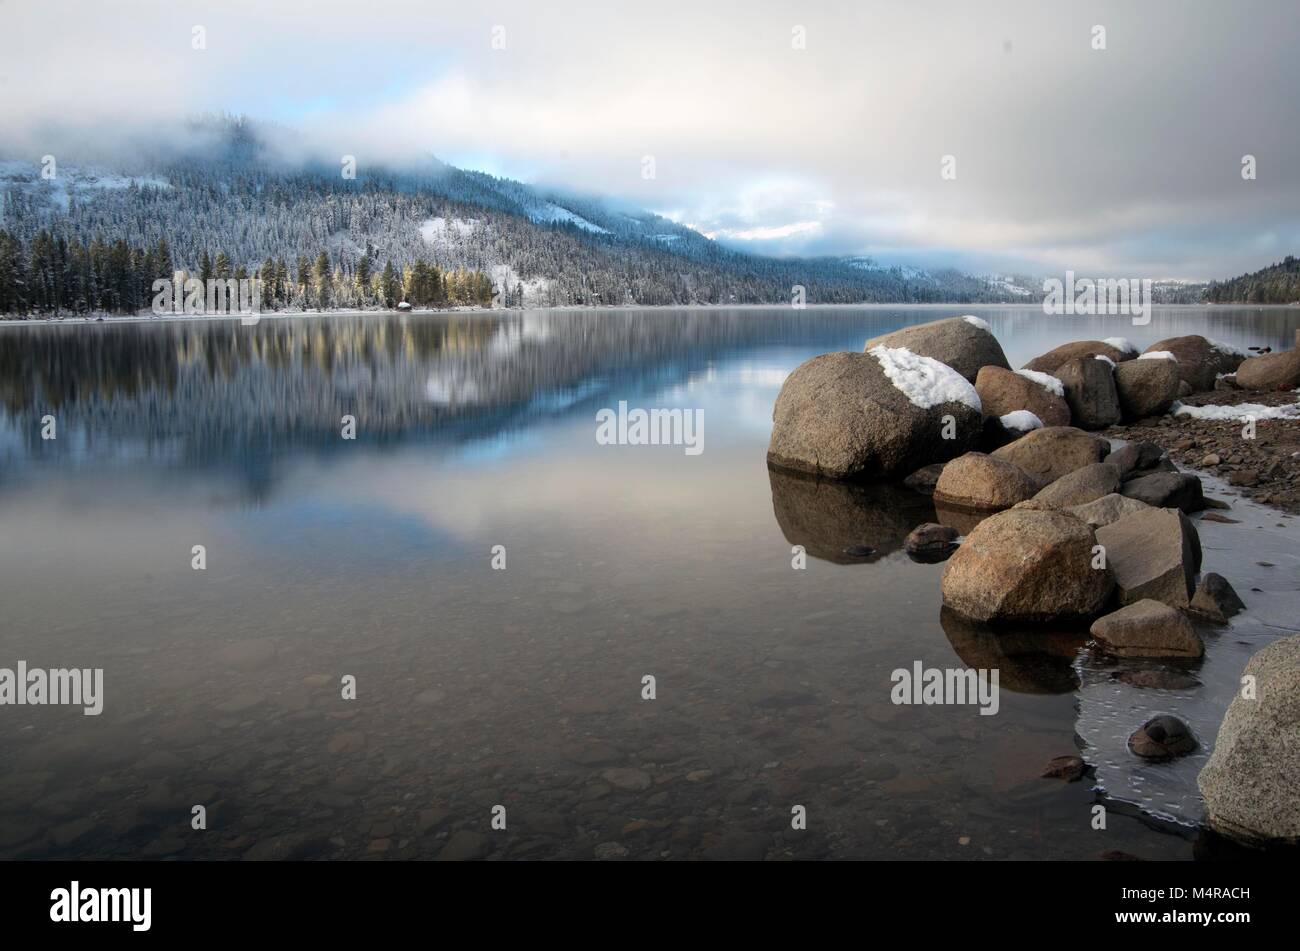 Patchy fog hovers over Donner Lake, CA, during an early January morning. Stock Photo